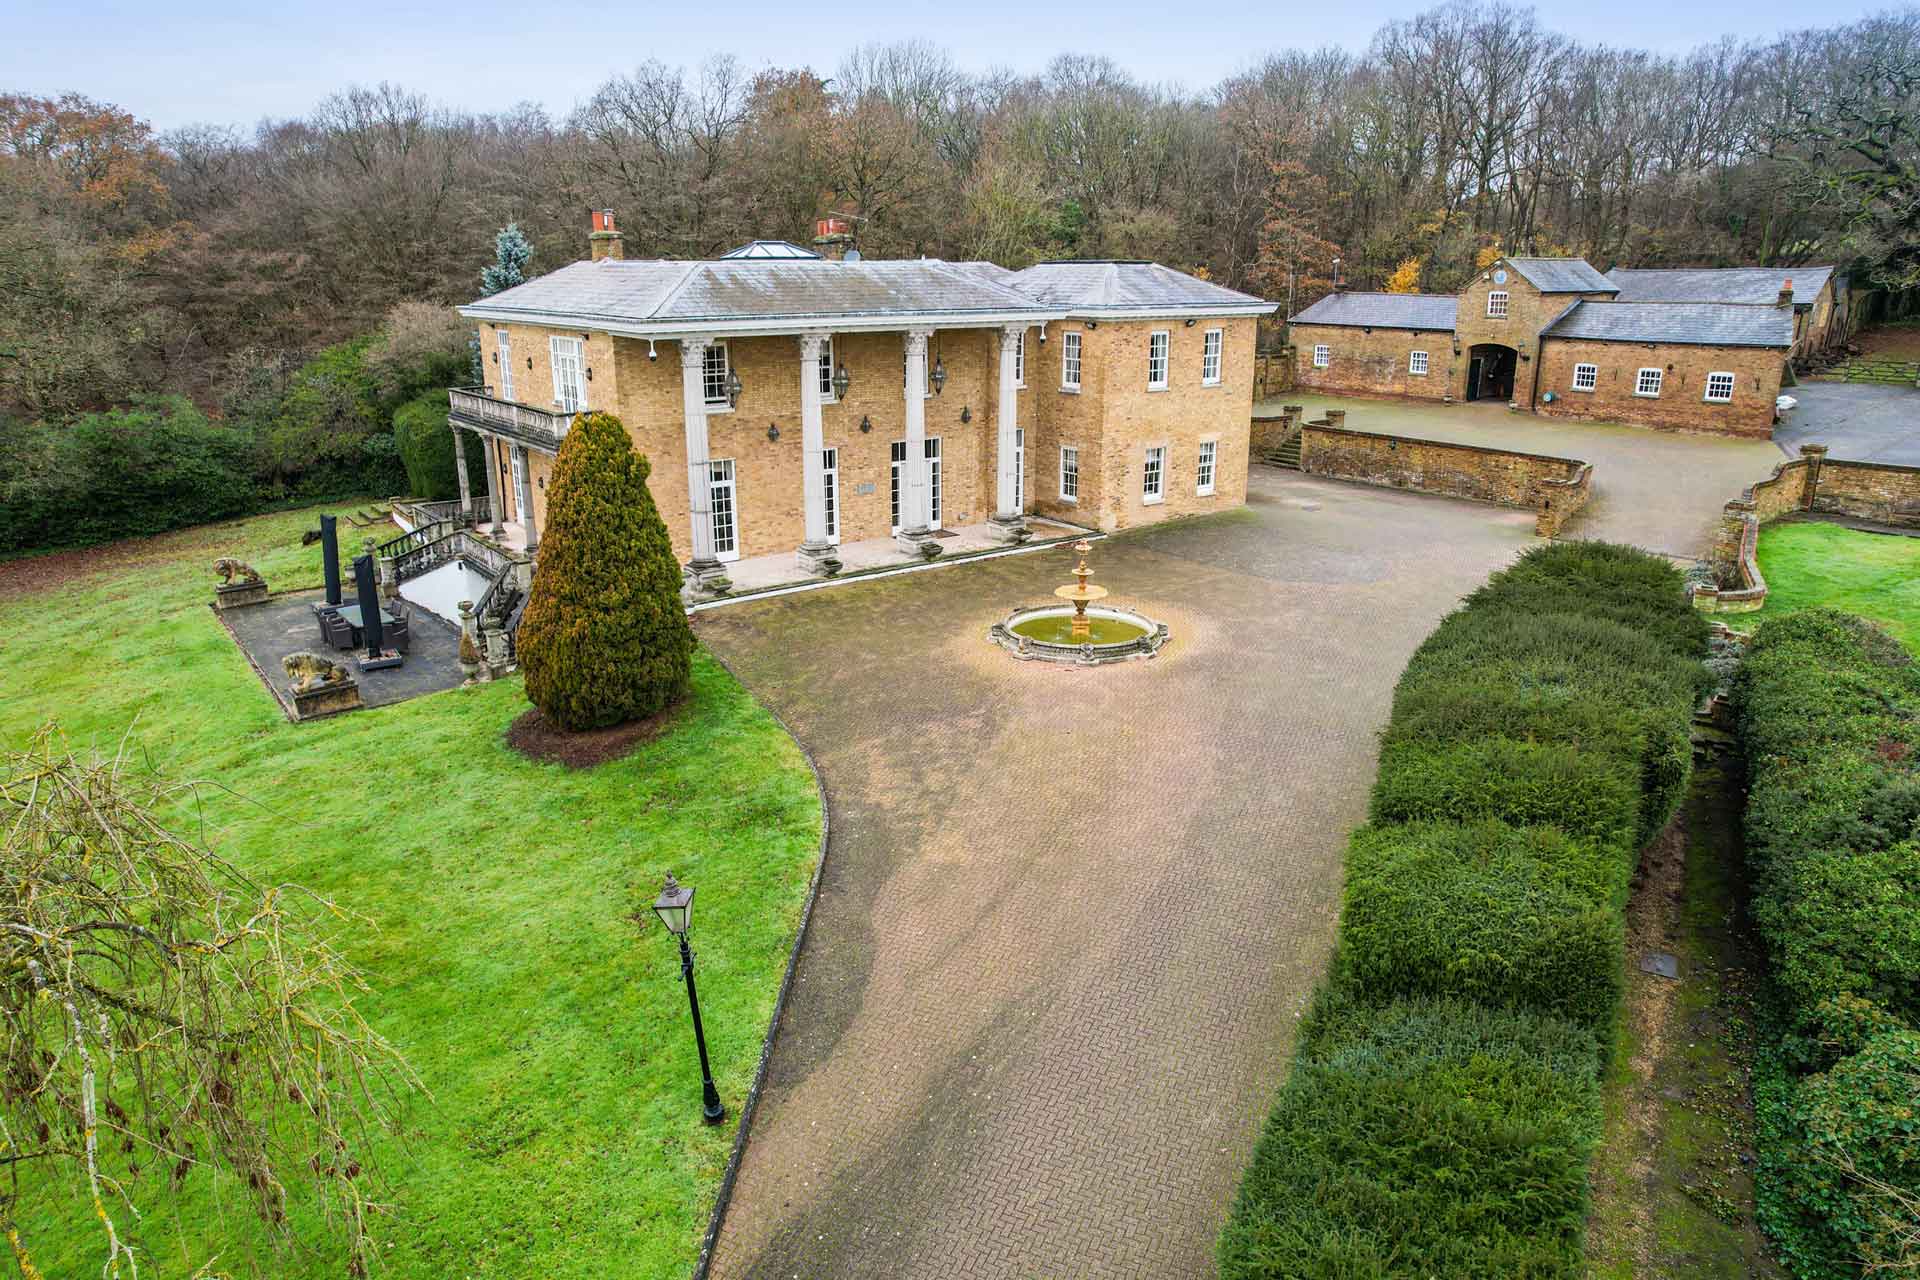 Aerial view of country manor with columns and sweeping driveway